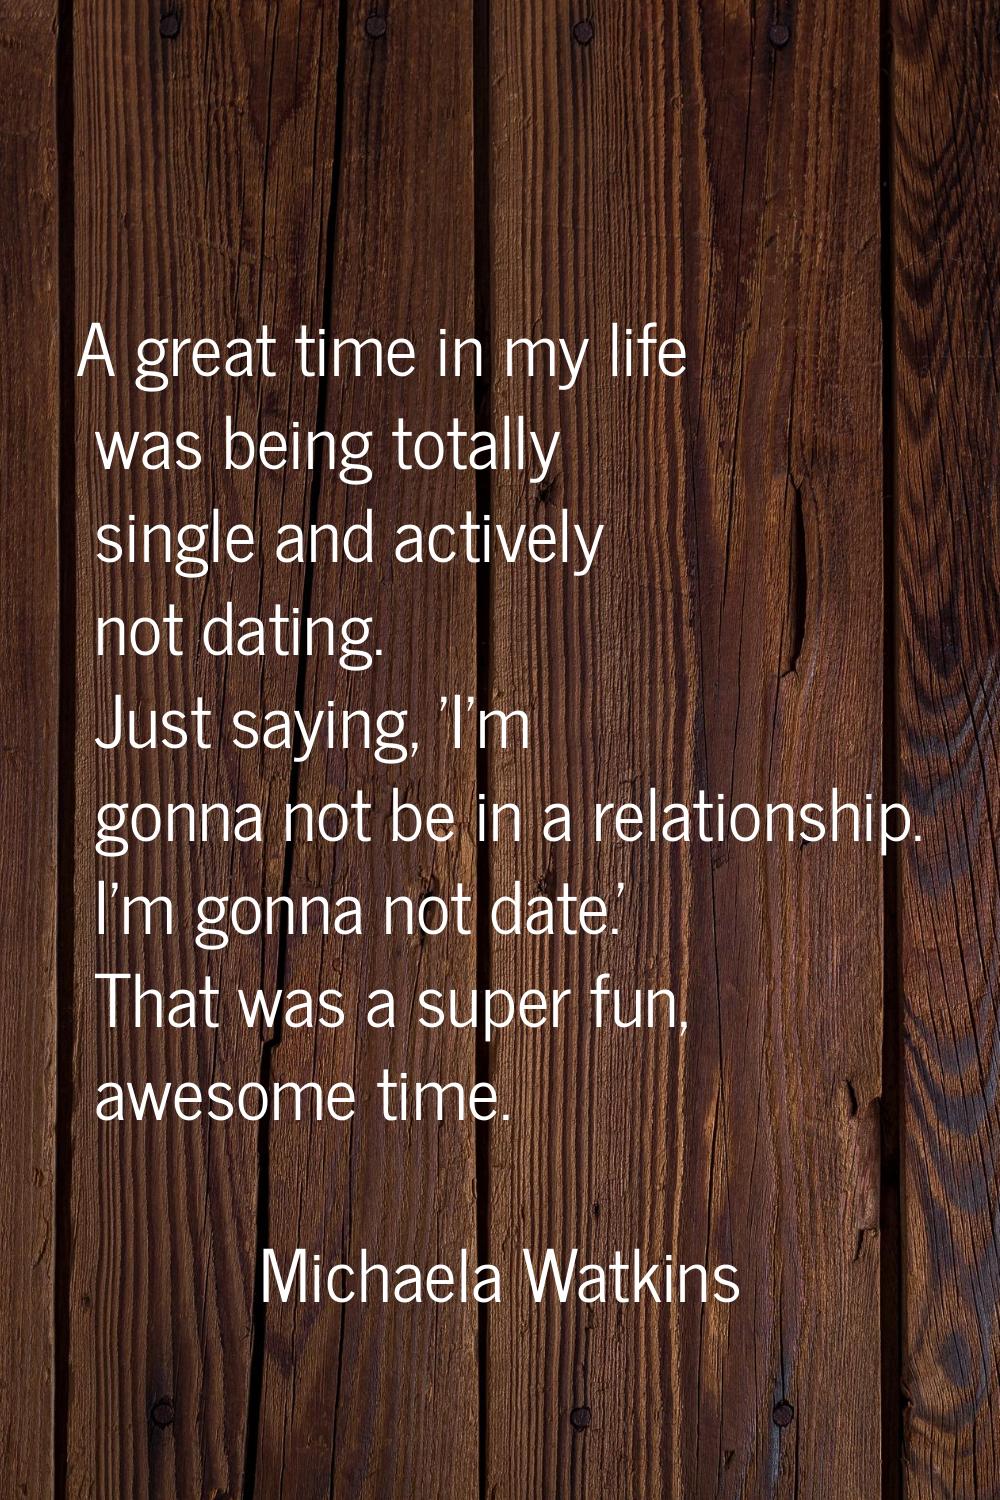 A great time in my life was being totally single and actively not dating. Just saying, 'I'm gonna n